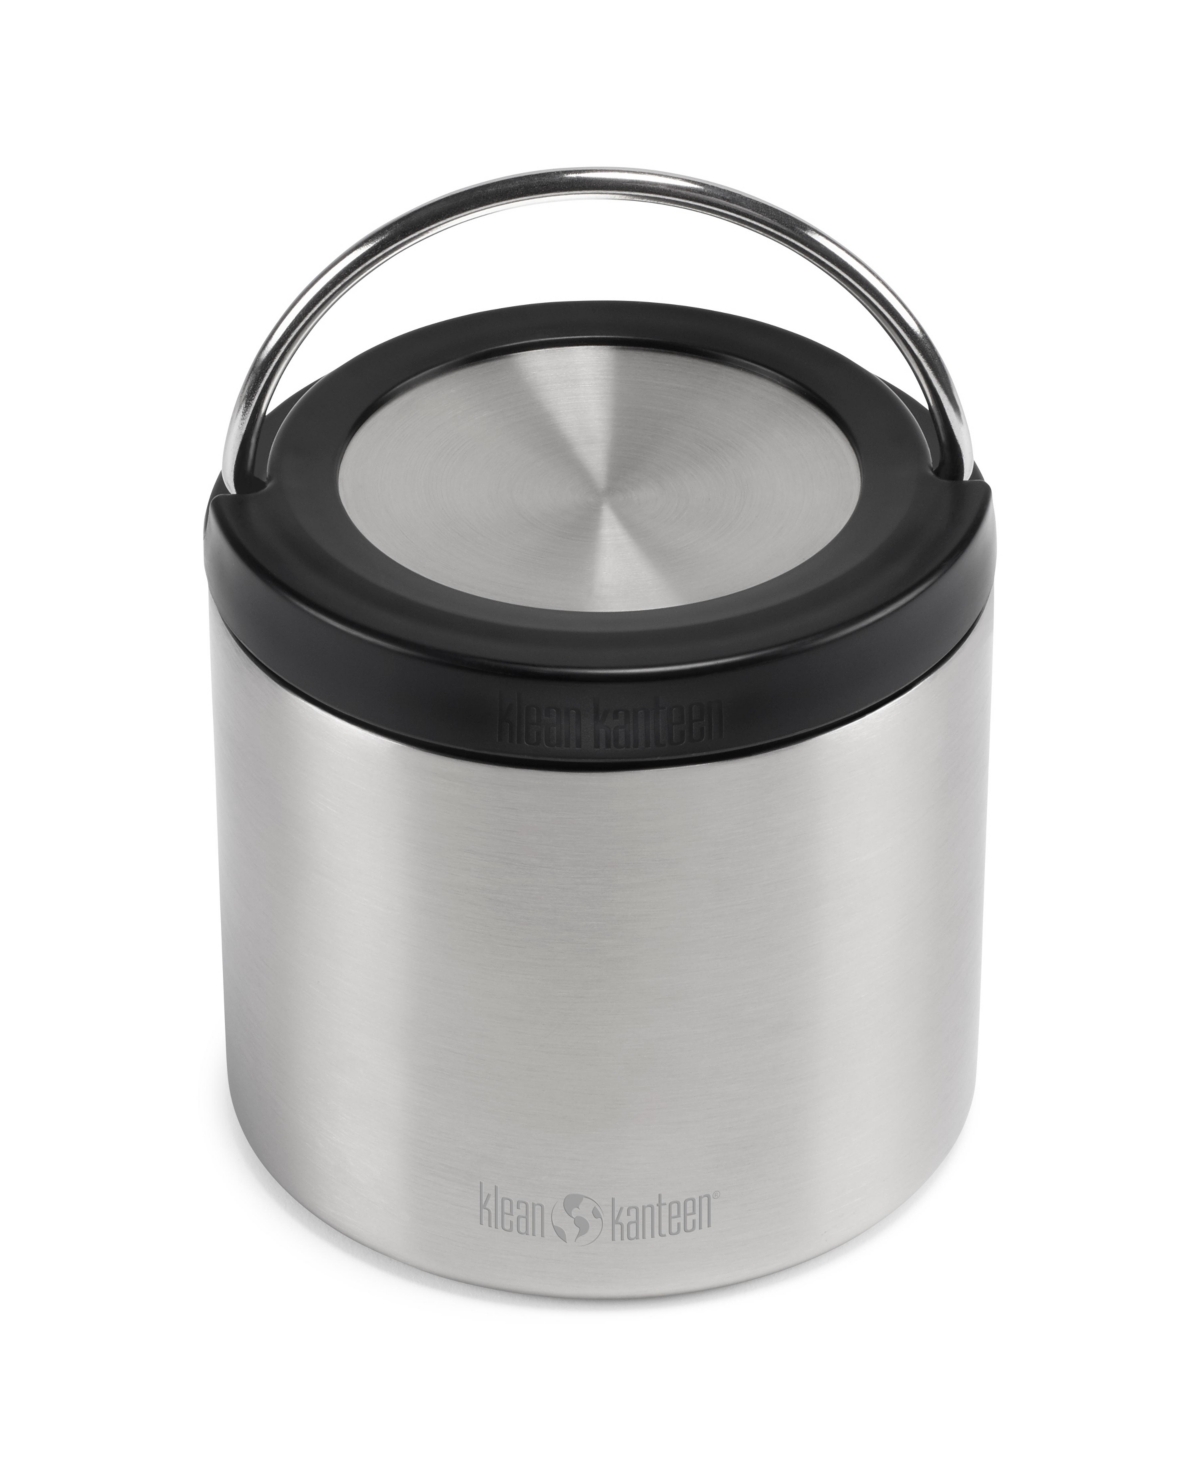 Klean Kanteen Insulated Tk Food Canister 16 oz